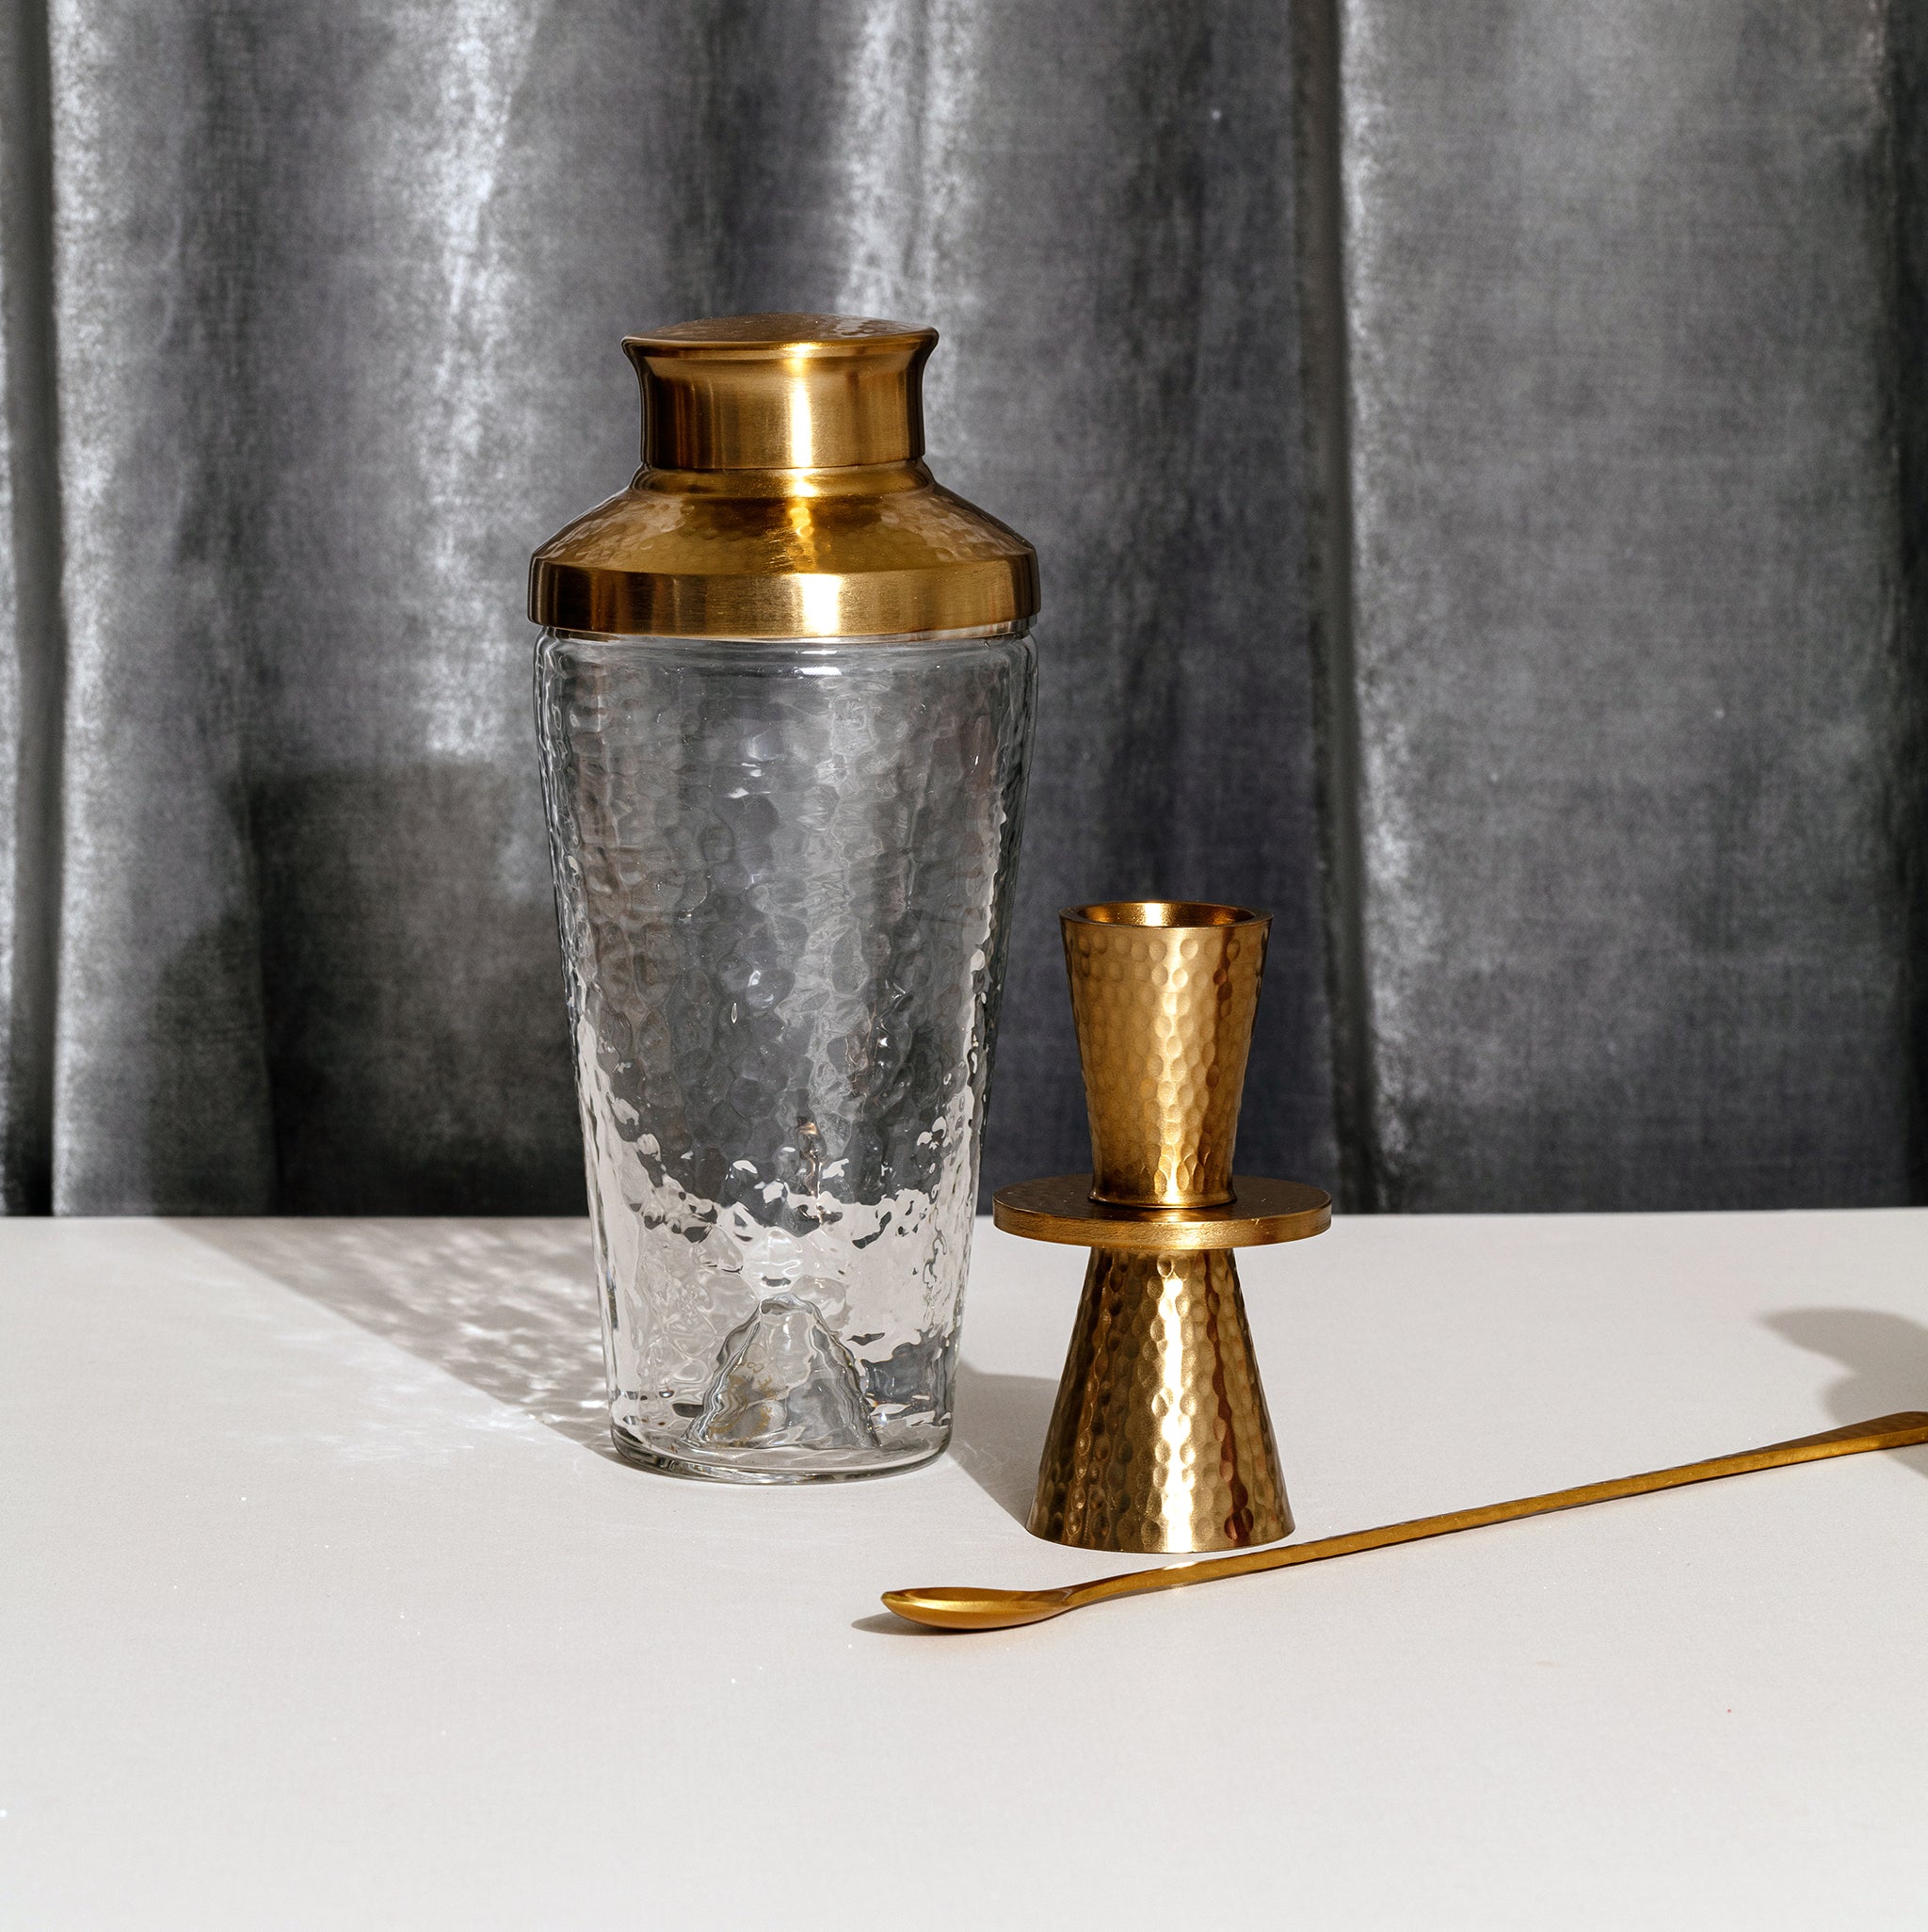 pebbled glass cocktail shaker, featuring a hammered, brass-like stainless steel lid crowning a lightly dimpled glass body. The vessel is handcrafted from partially recycled glass, giving it a slightly greenish hue